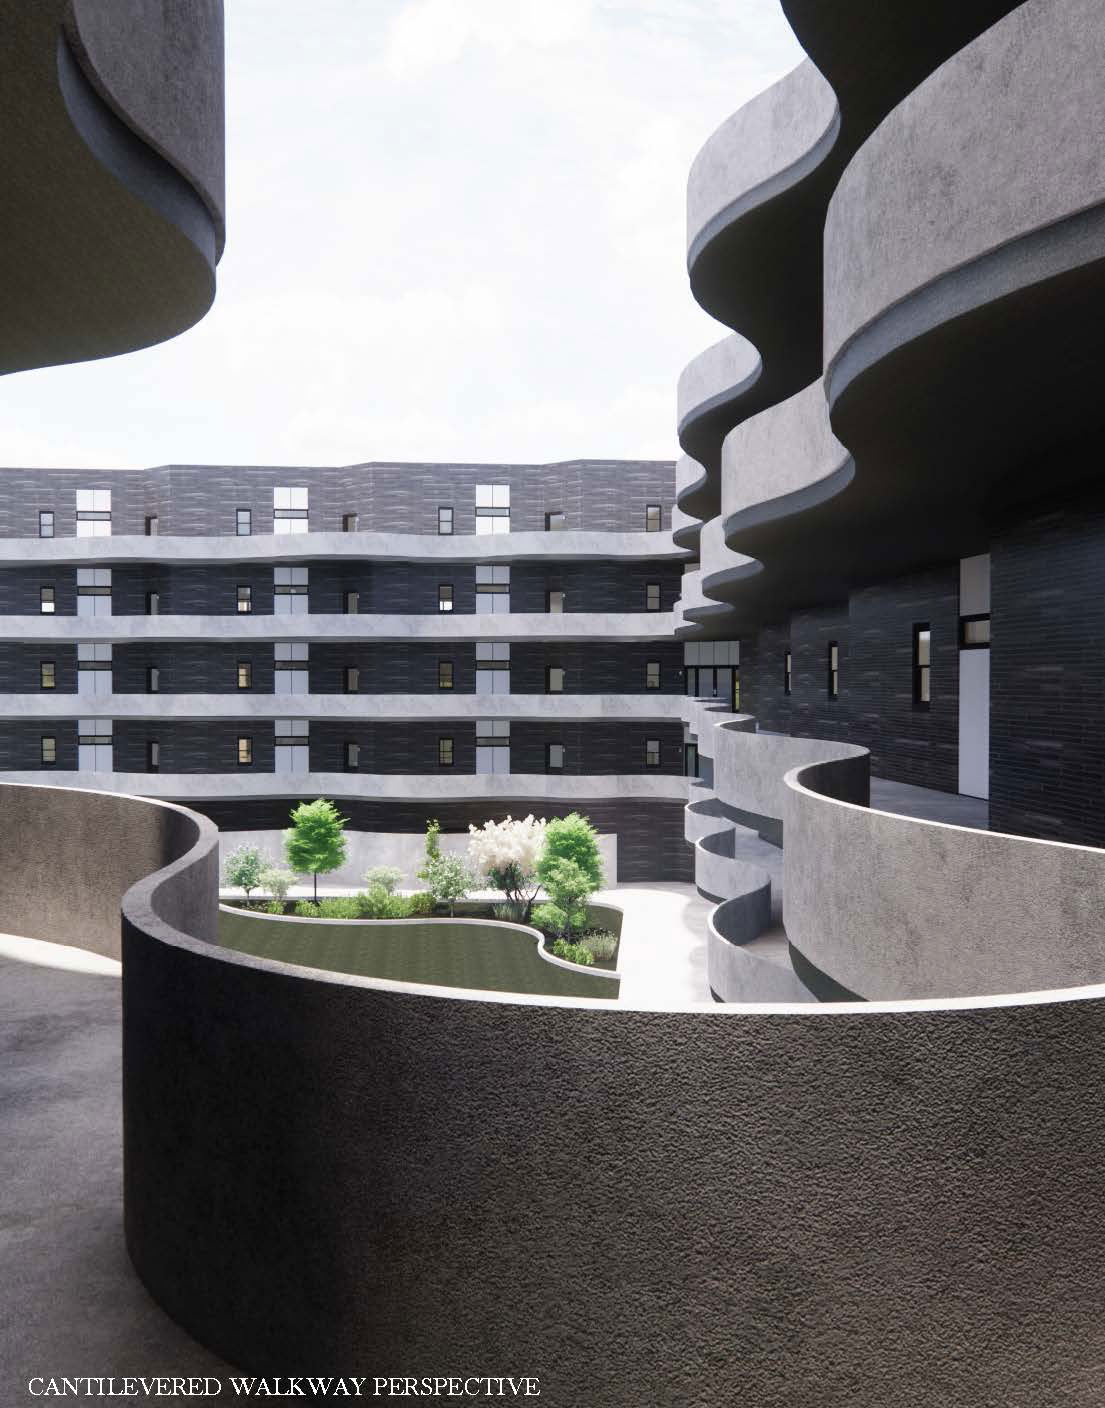 The bottom left of this phot reads &quot;cantilevered walkway perspective&quot;. The building is dark gray and consists of light gray balcony railings that weave their way through the building in squiggle shapes. The bottom ground has trees and grassy area.